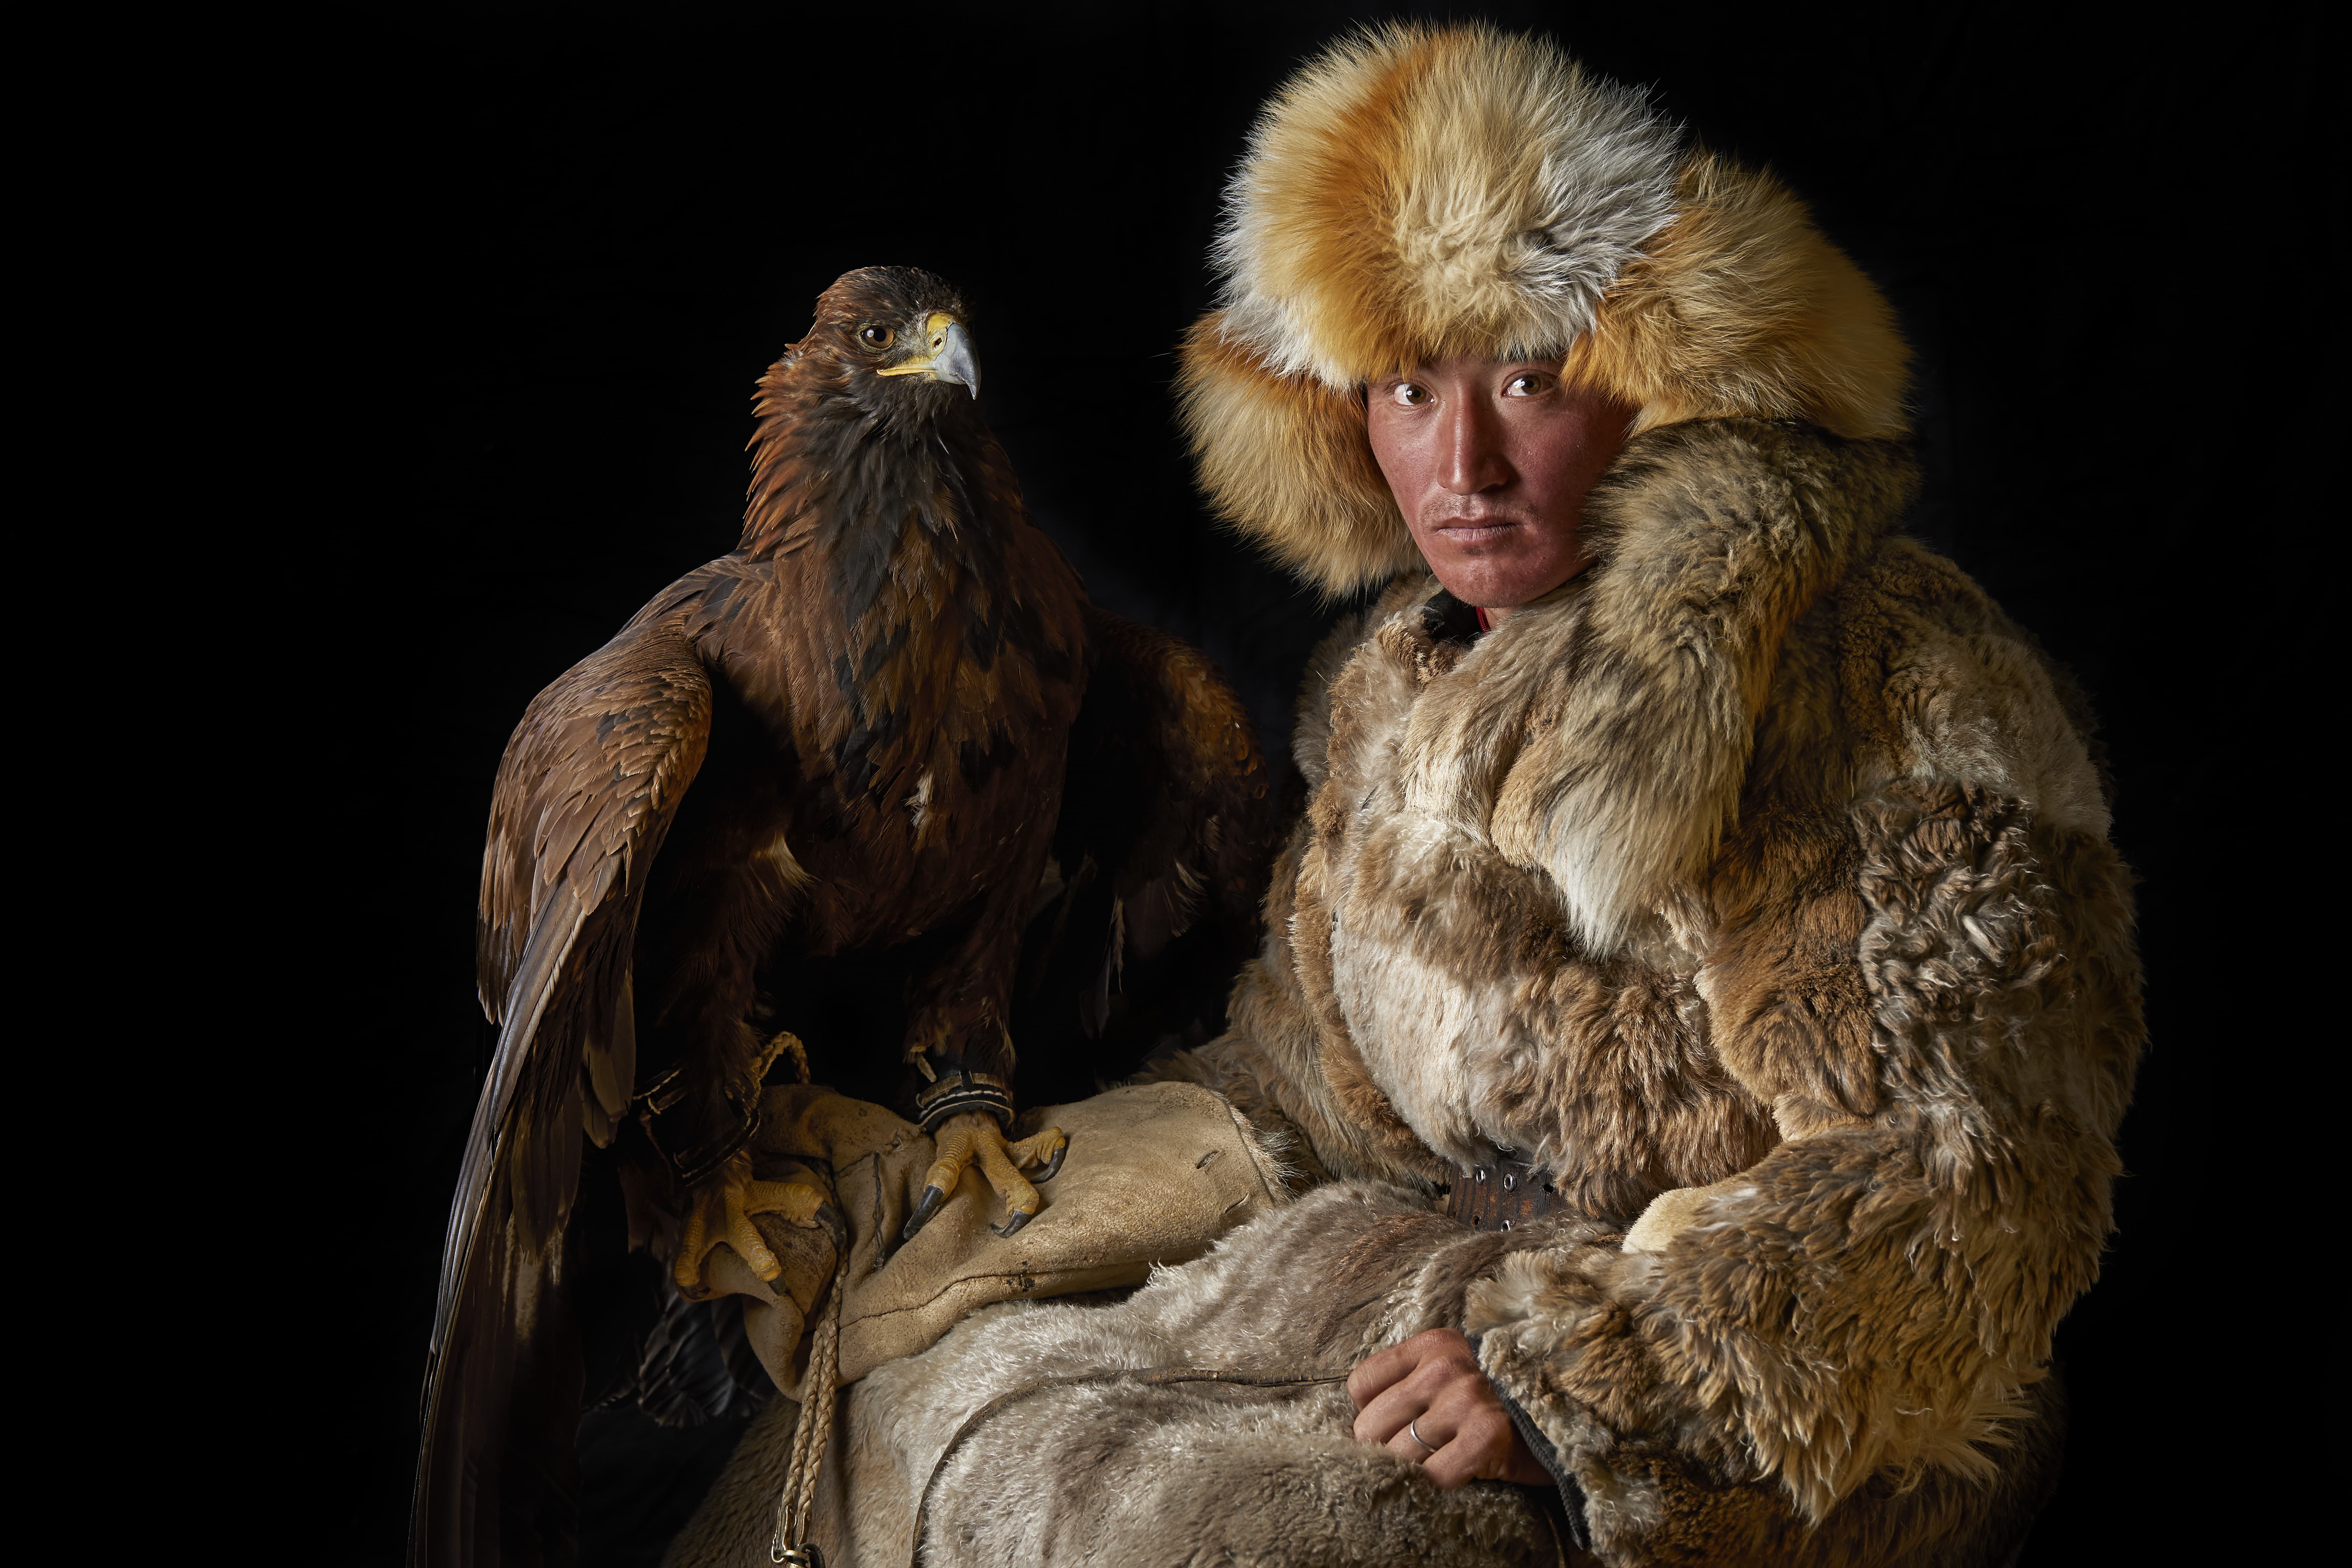 Portrait of a Mongolian eagle hunter, Mongolia Canon EOS 5D Mark IV with a Canon EF 100mm f/2.8L Macro IS USM lens, 1/60sec at f/6.3, ISO 100